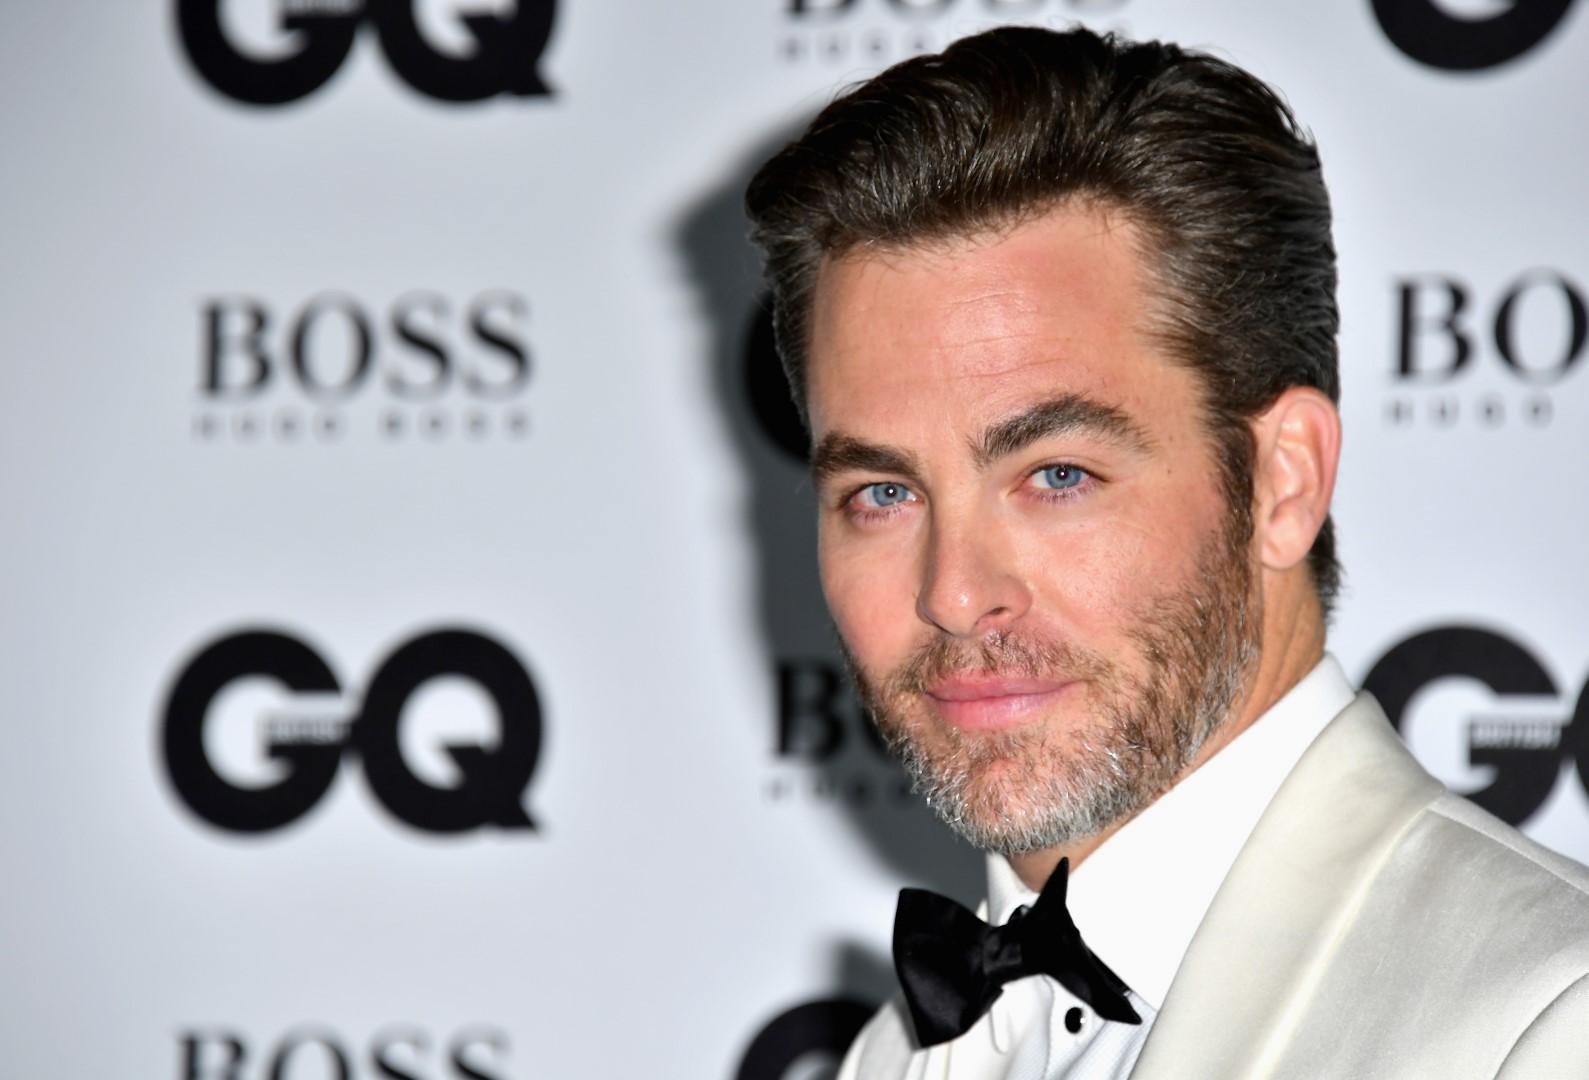 British GQ Men of the Year Awards 2016: il red carpet con Chris Pine, Amy Schumer e Florence Welch